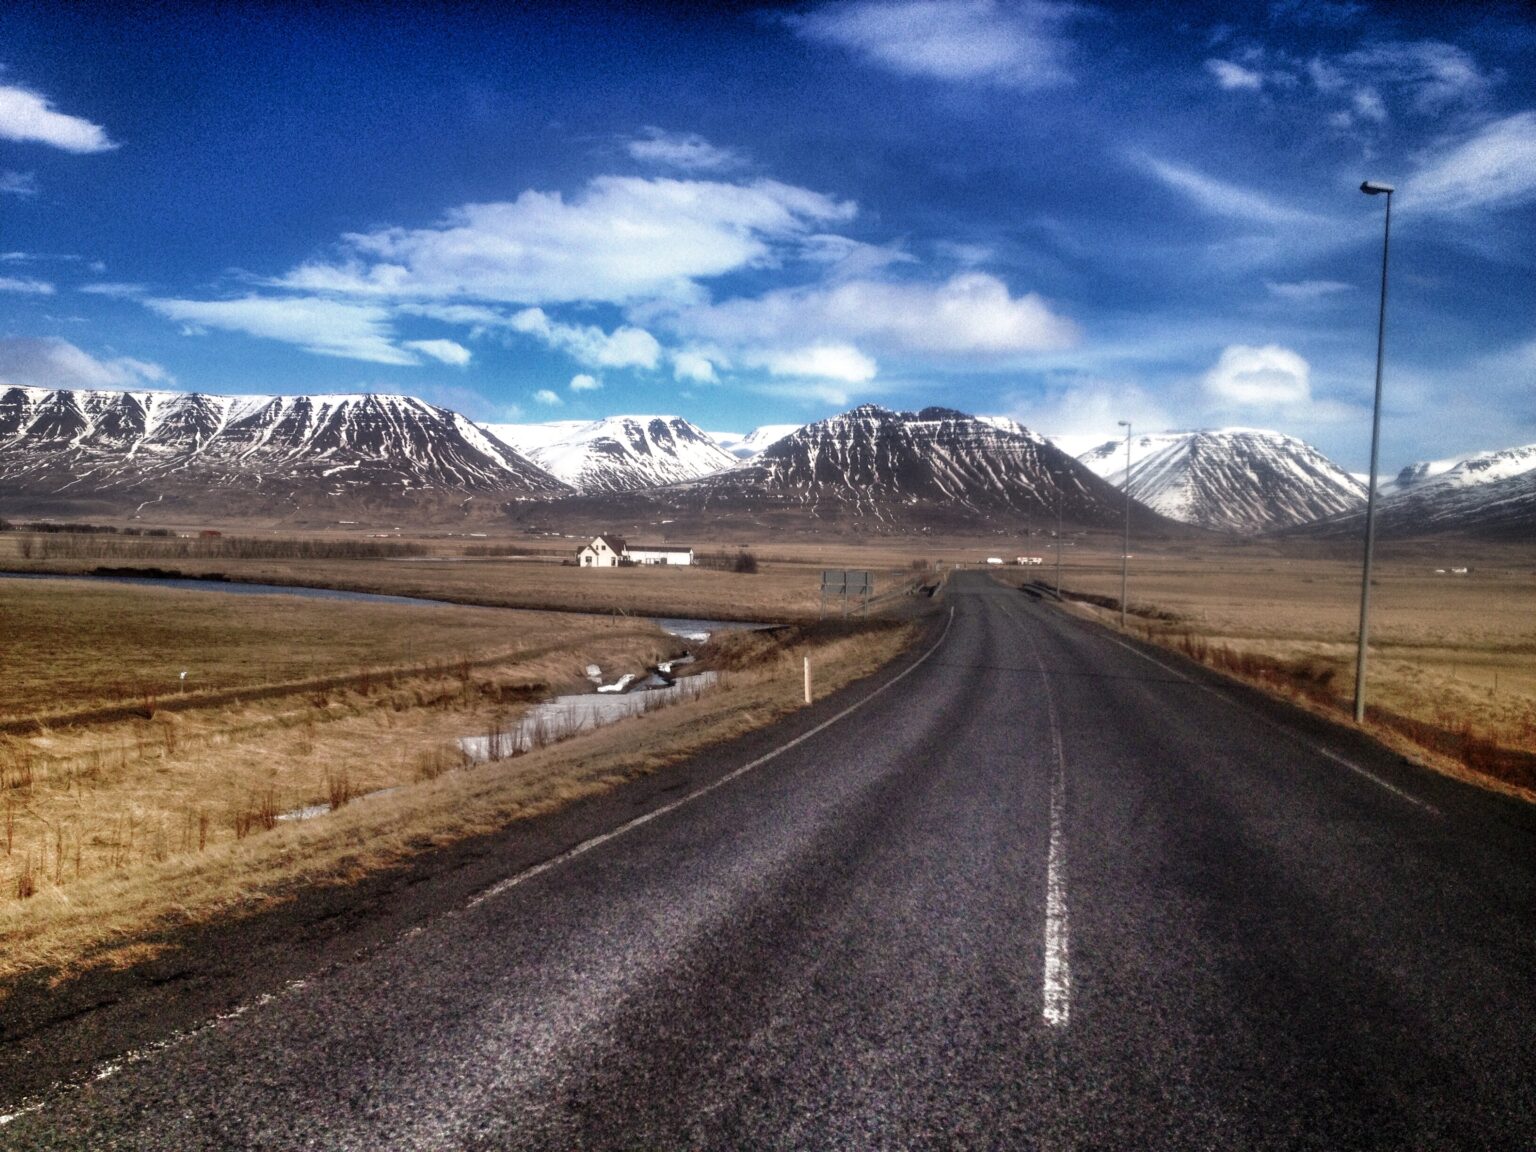 Driving to the Northern section of Iceland